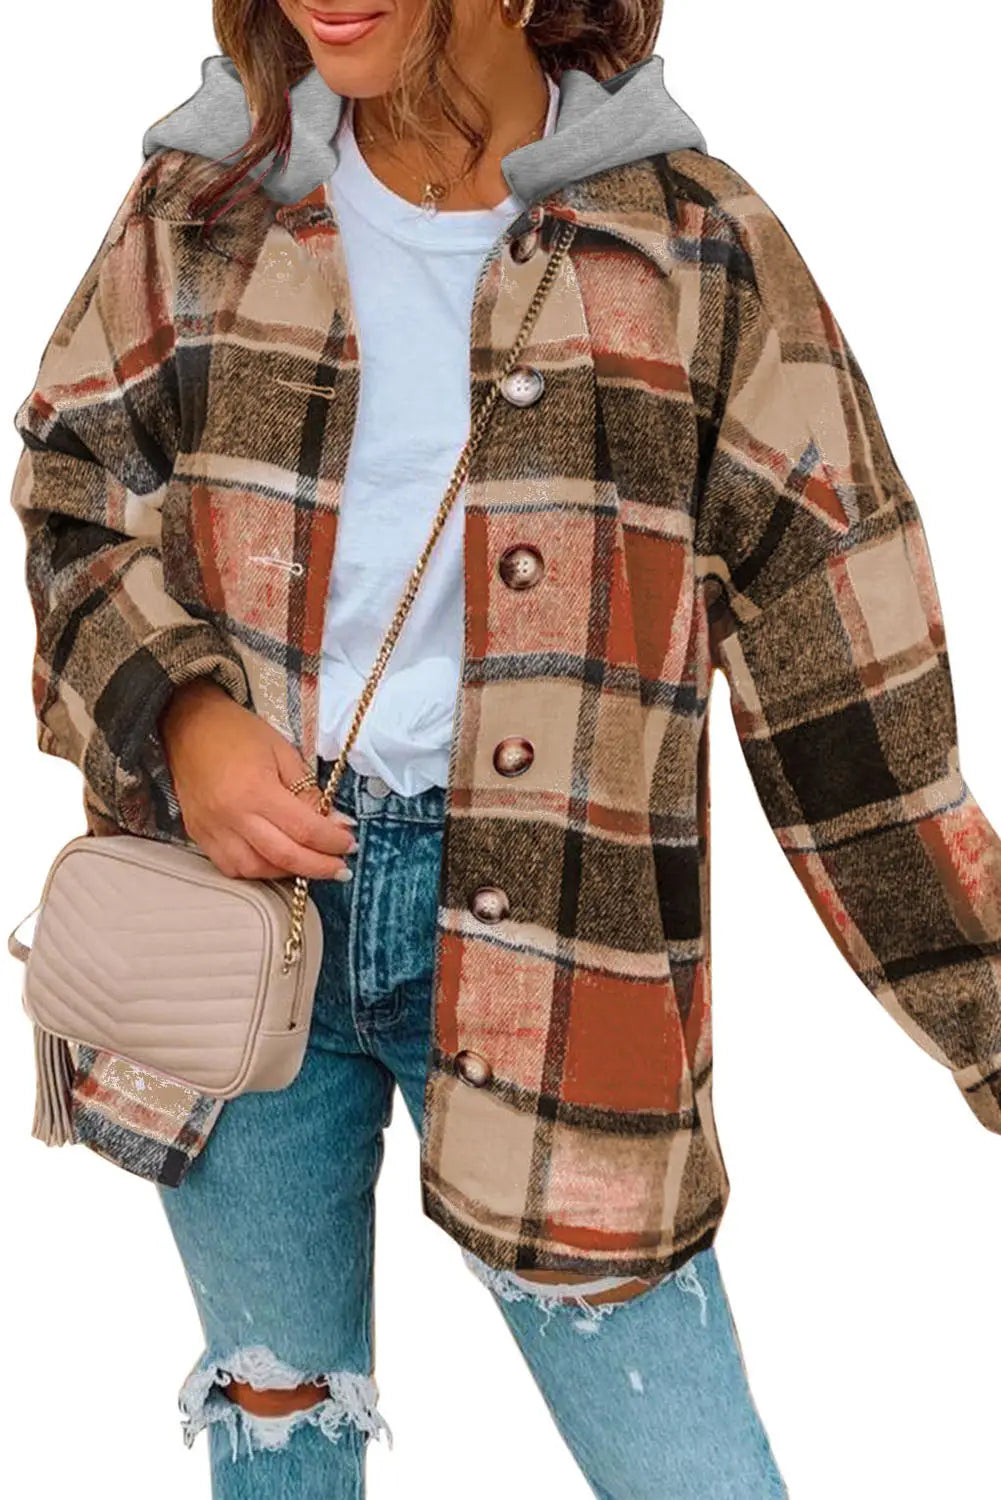 Orange hooded plaid button front shacket - outerwear